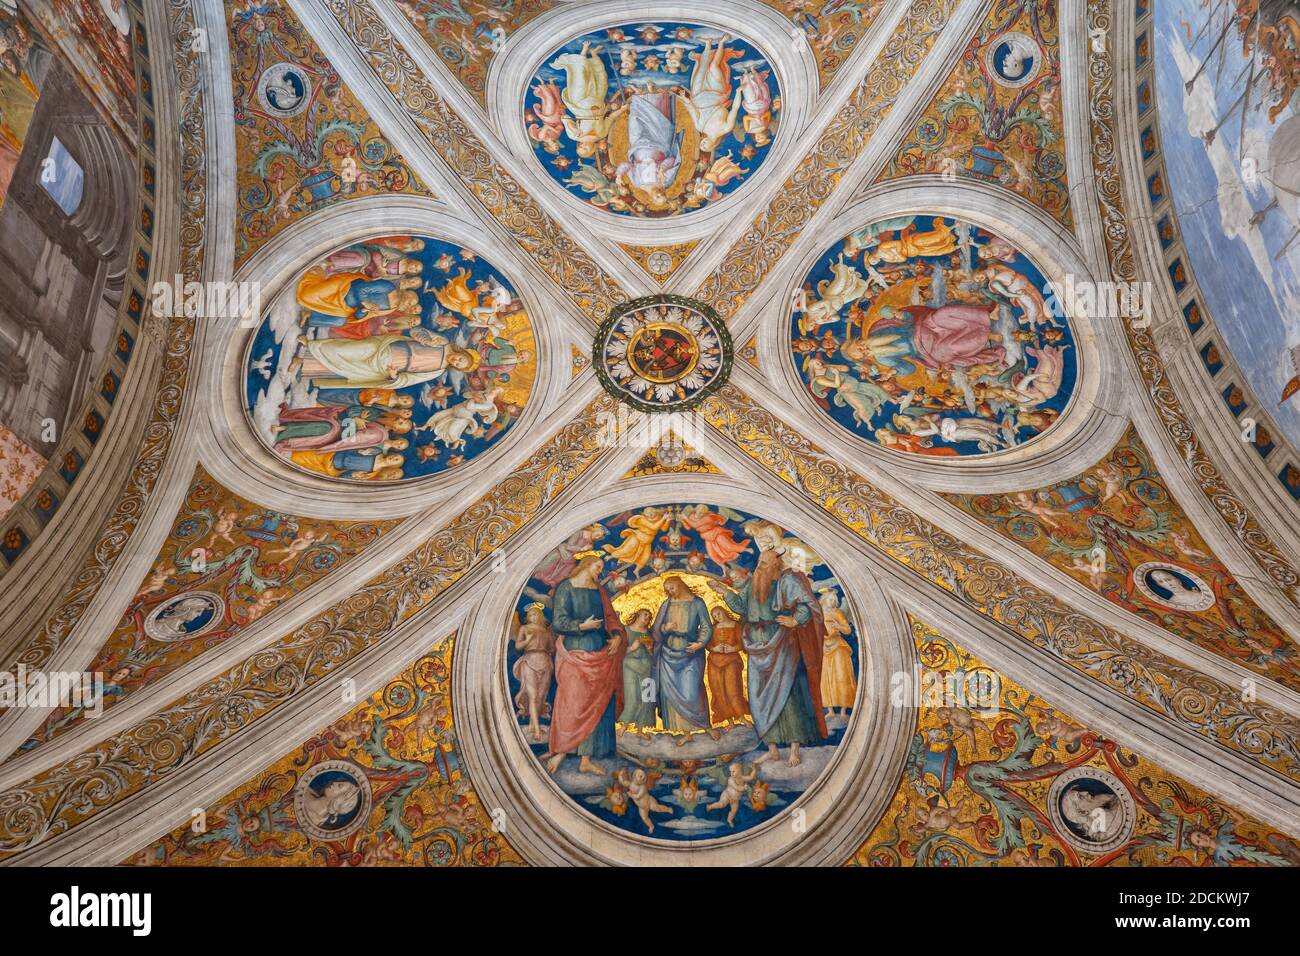 Ceiling with four medallions the Most Holy Trinity by Pietro Vannucci(Perugino) in Room of the Fire in the Borgo, Raphael's Rooms, Vatican Museums, Ro Stock Photo